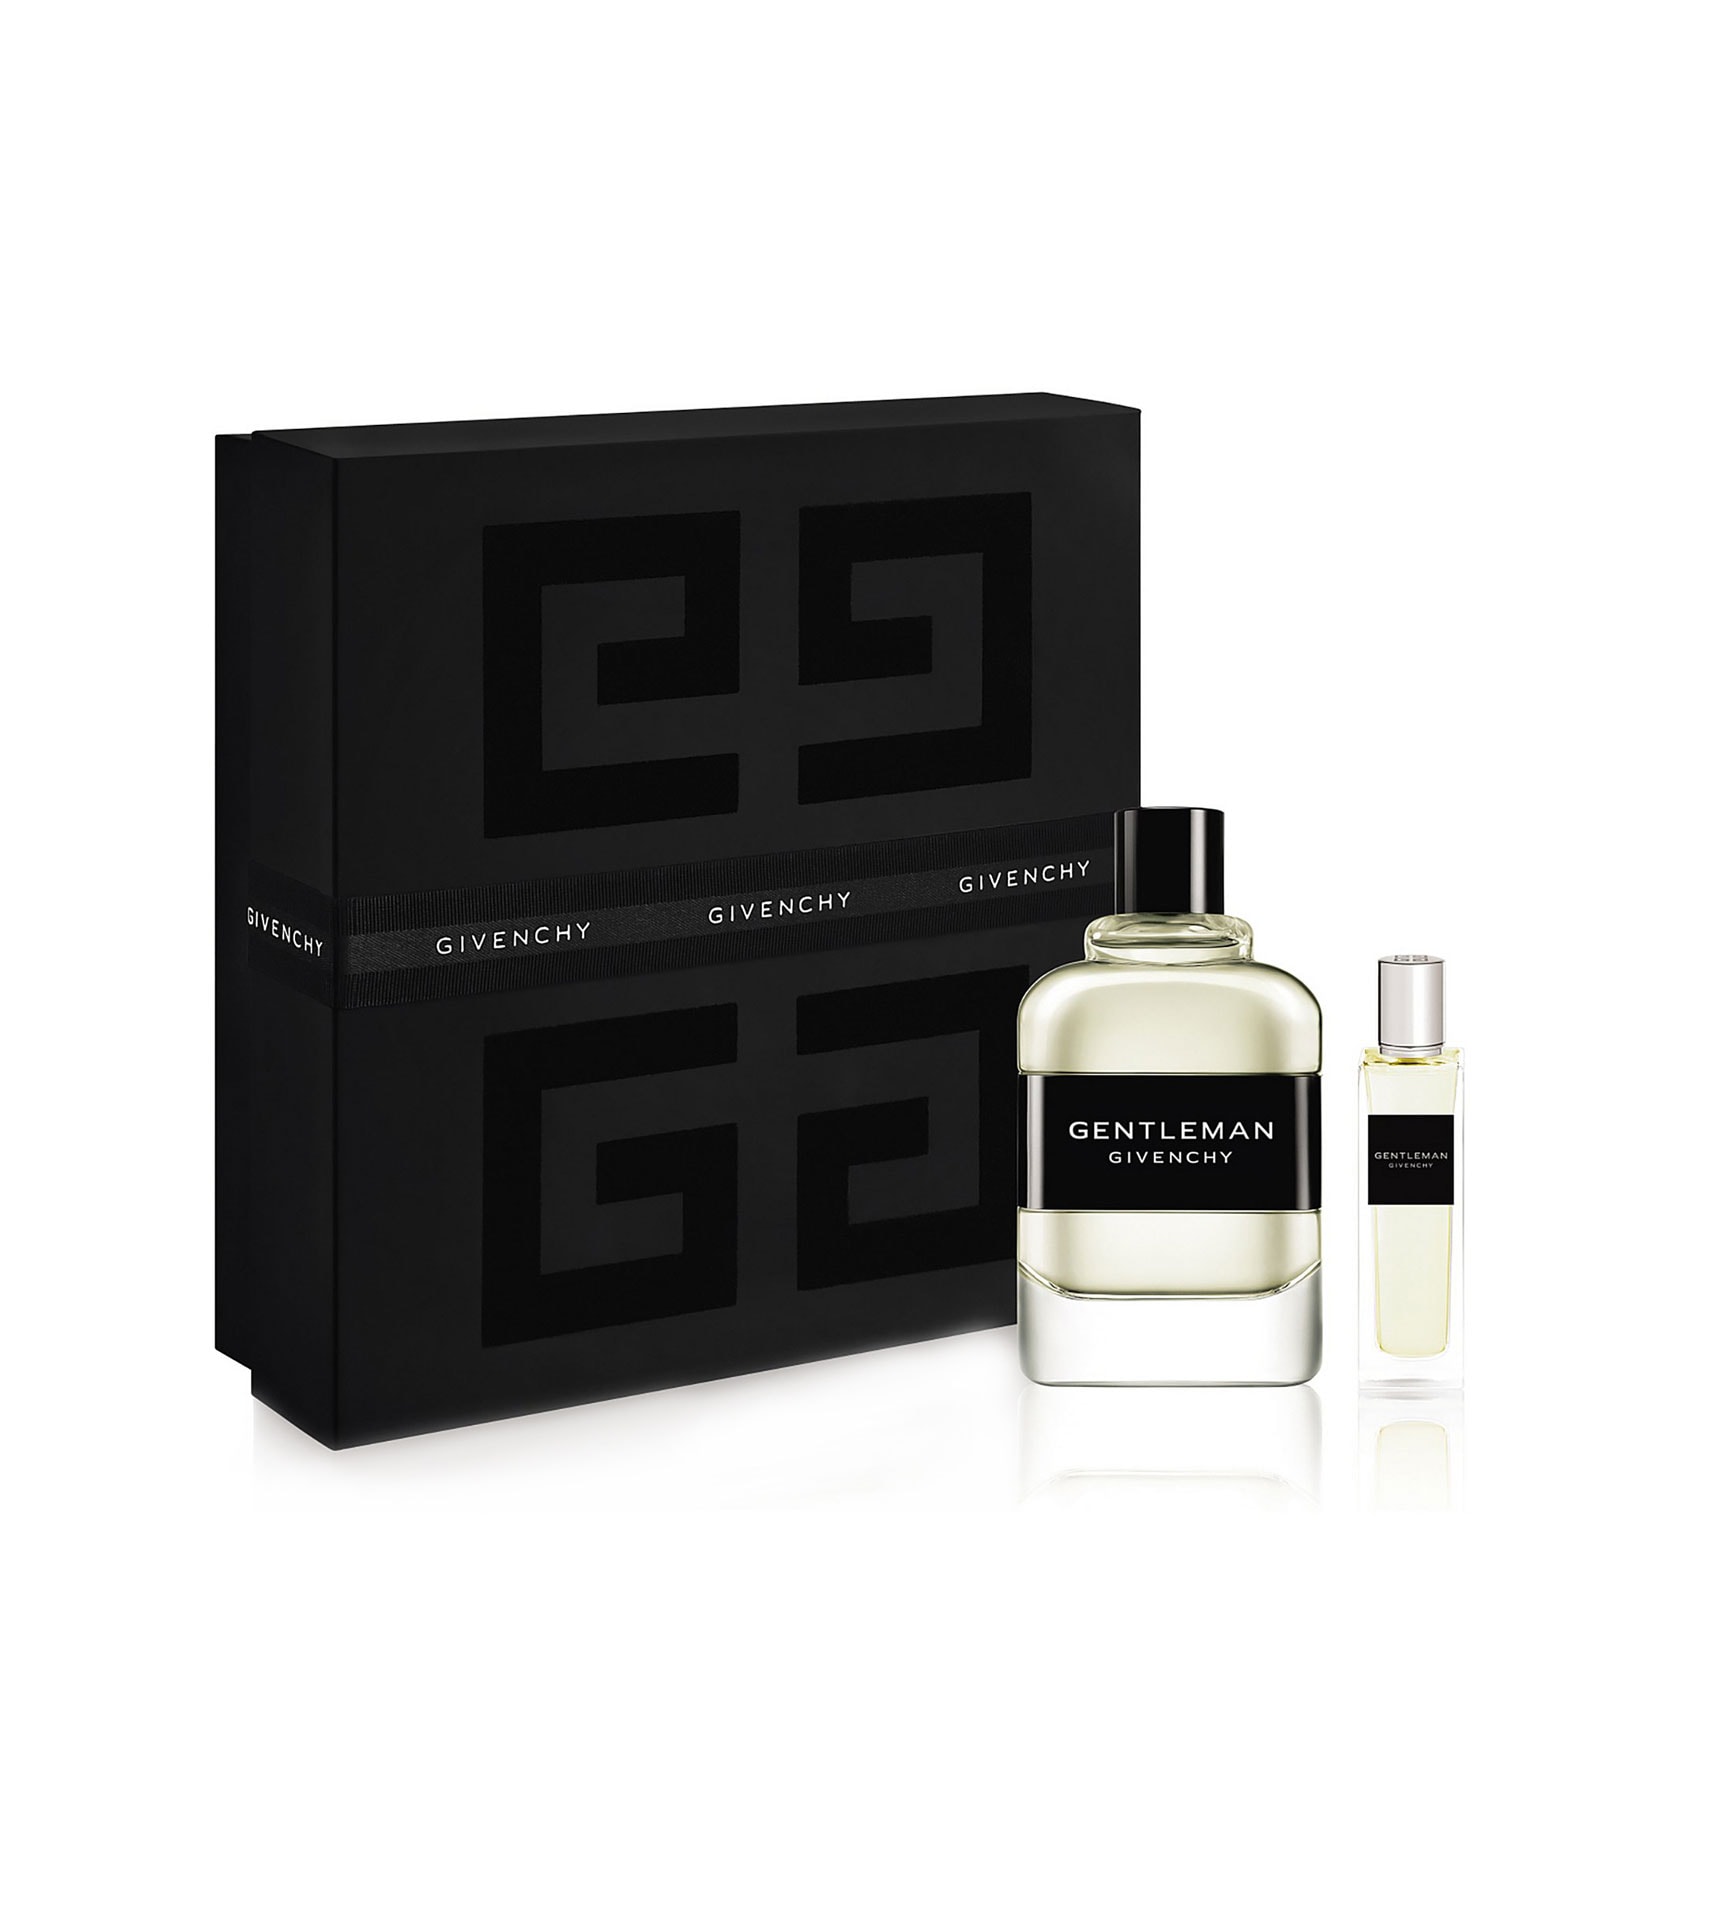 Givenchy society. Gentlemen only Givenchy набор. Givenchy Gentleman Society. Givenchy product PNG.